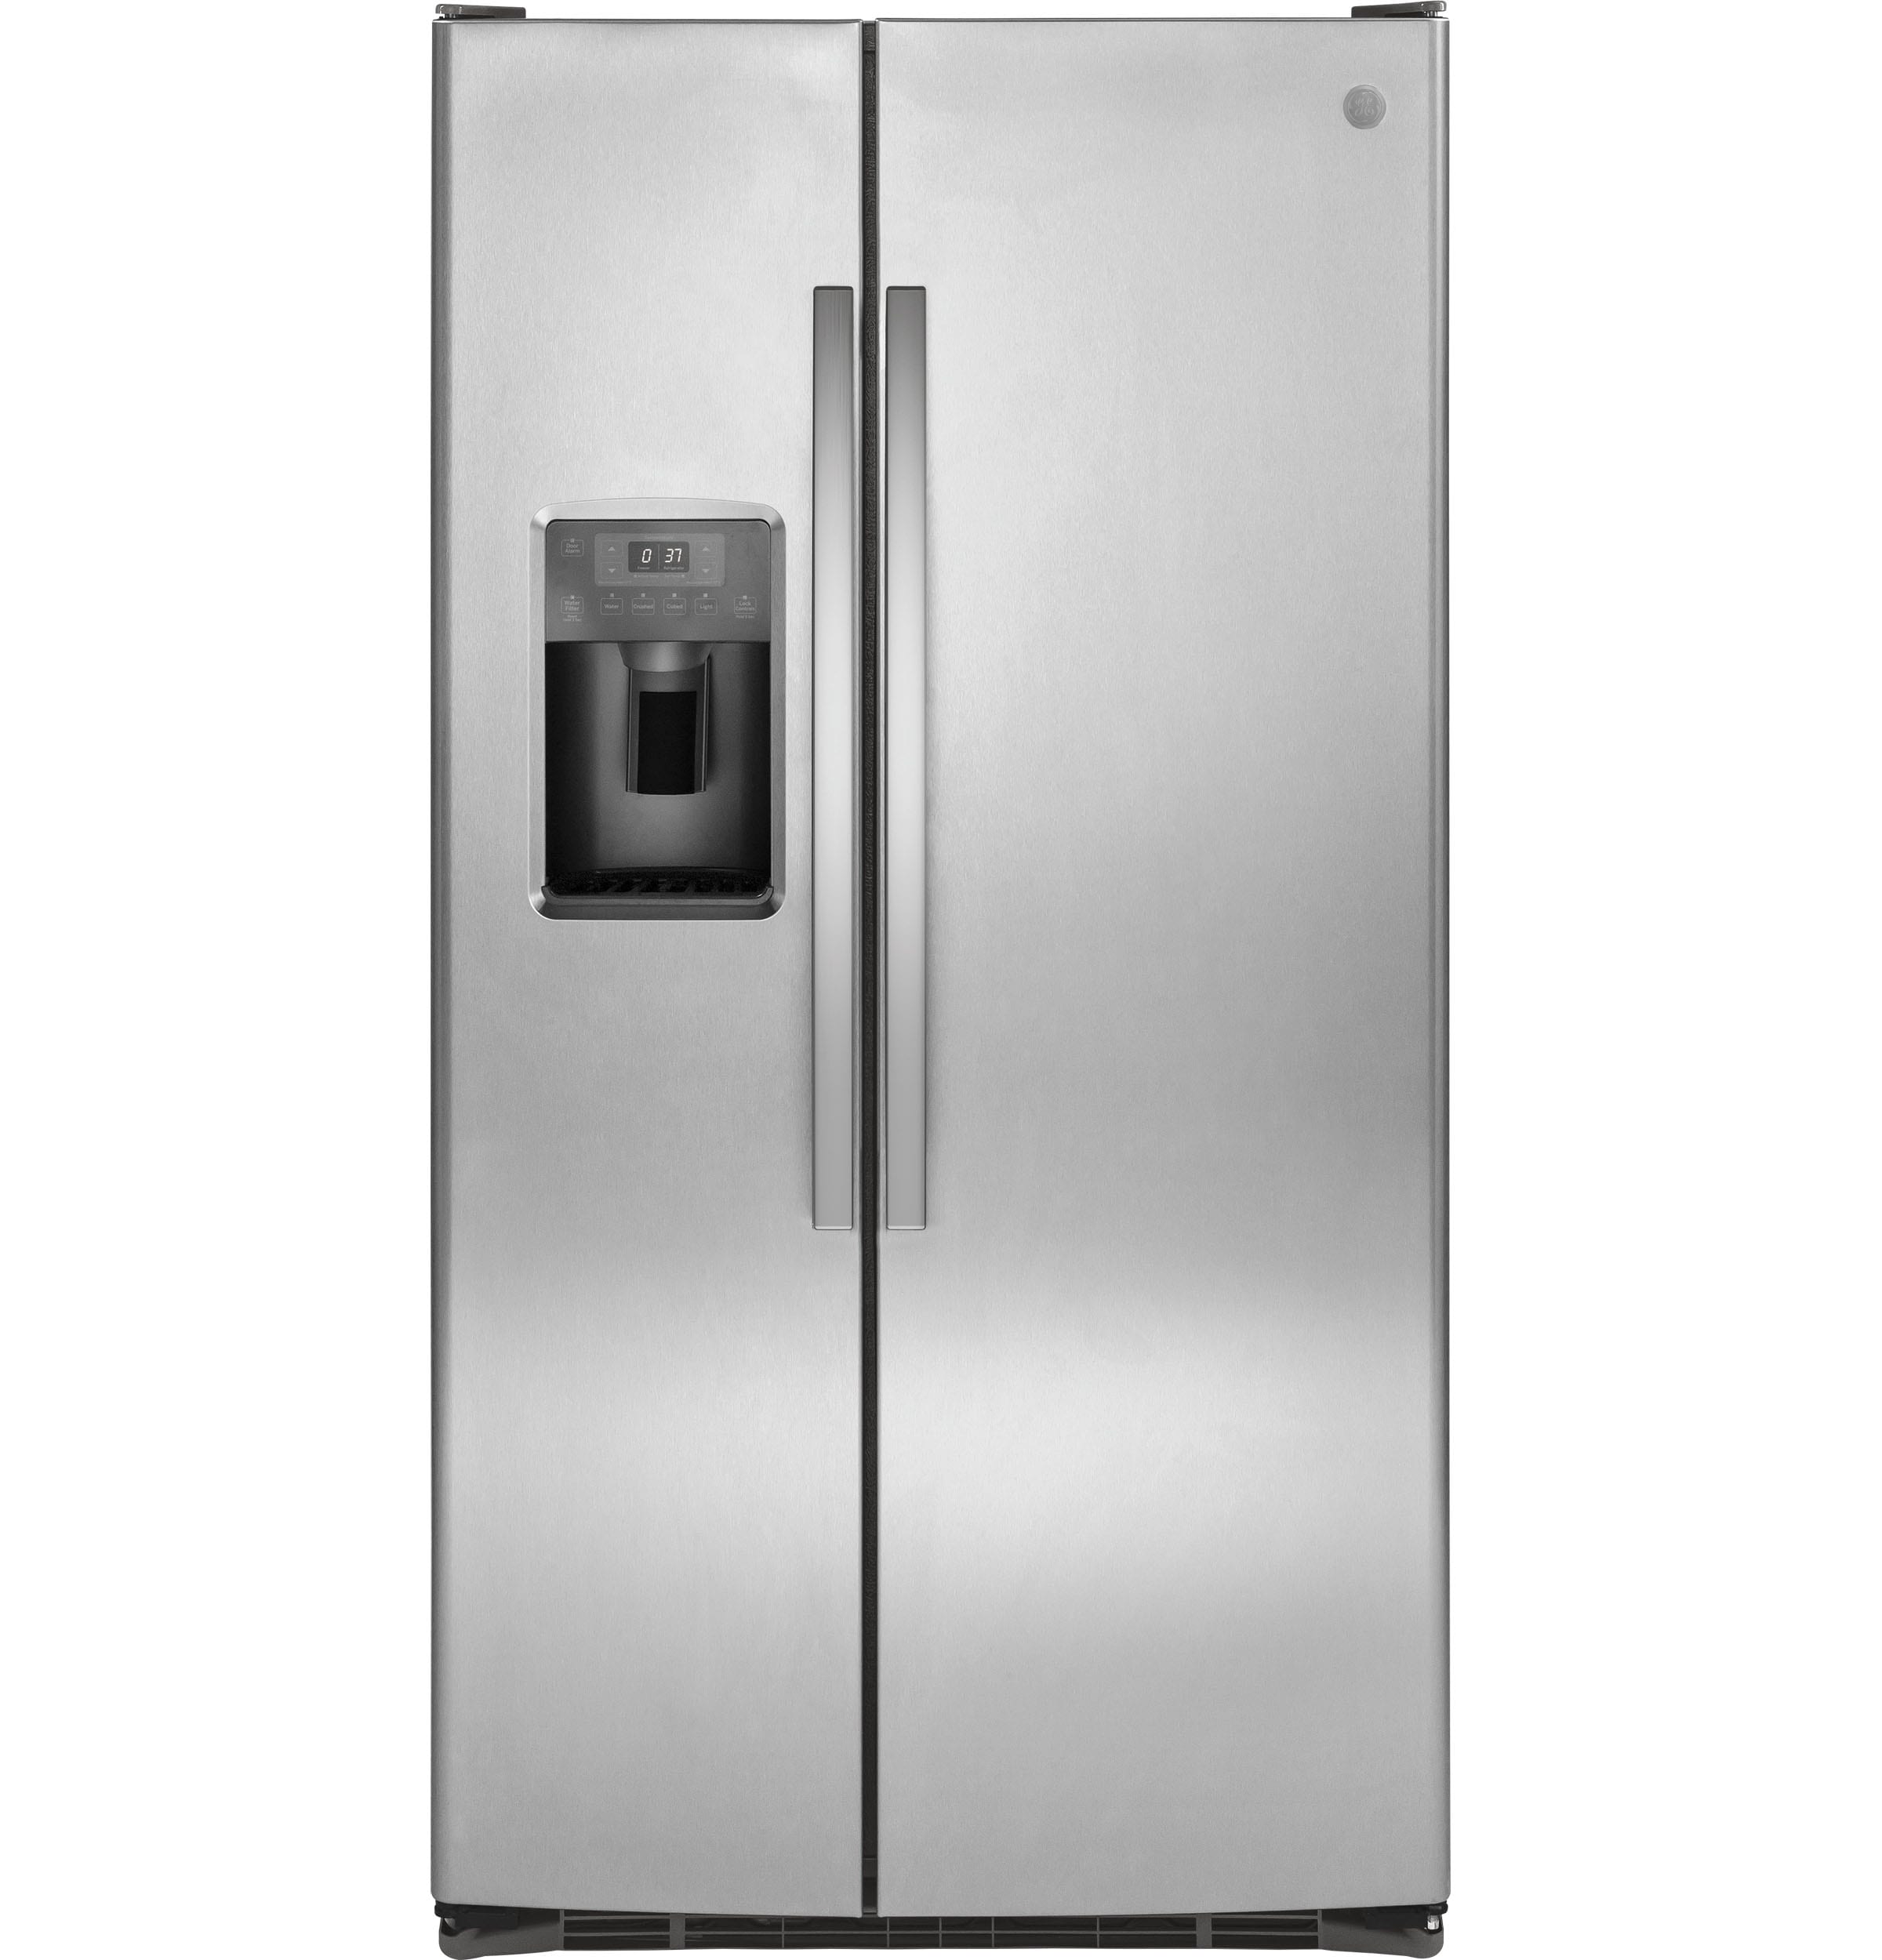 GE 25.3-cu ft Side-by-Side Refrigerator with Ice Maker (Stainless